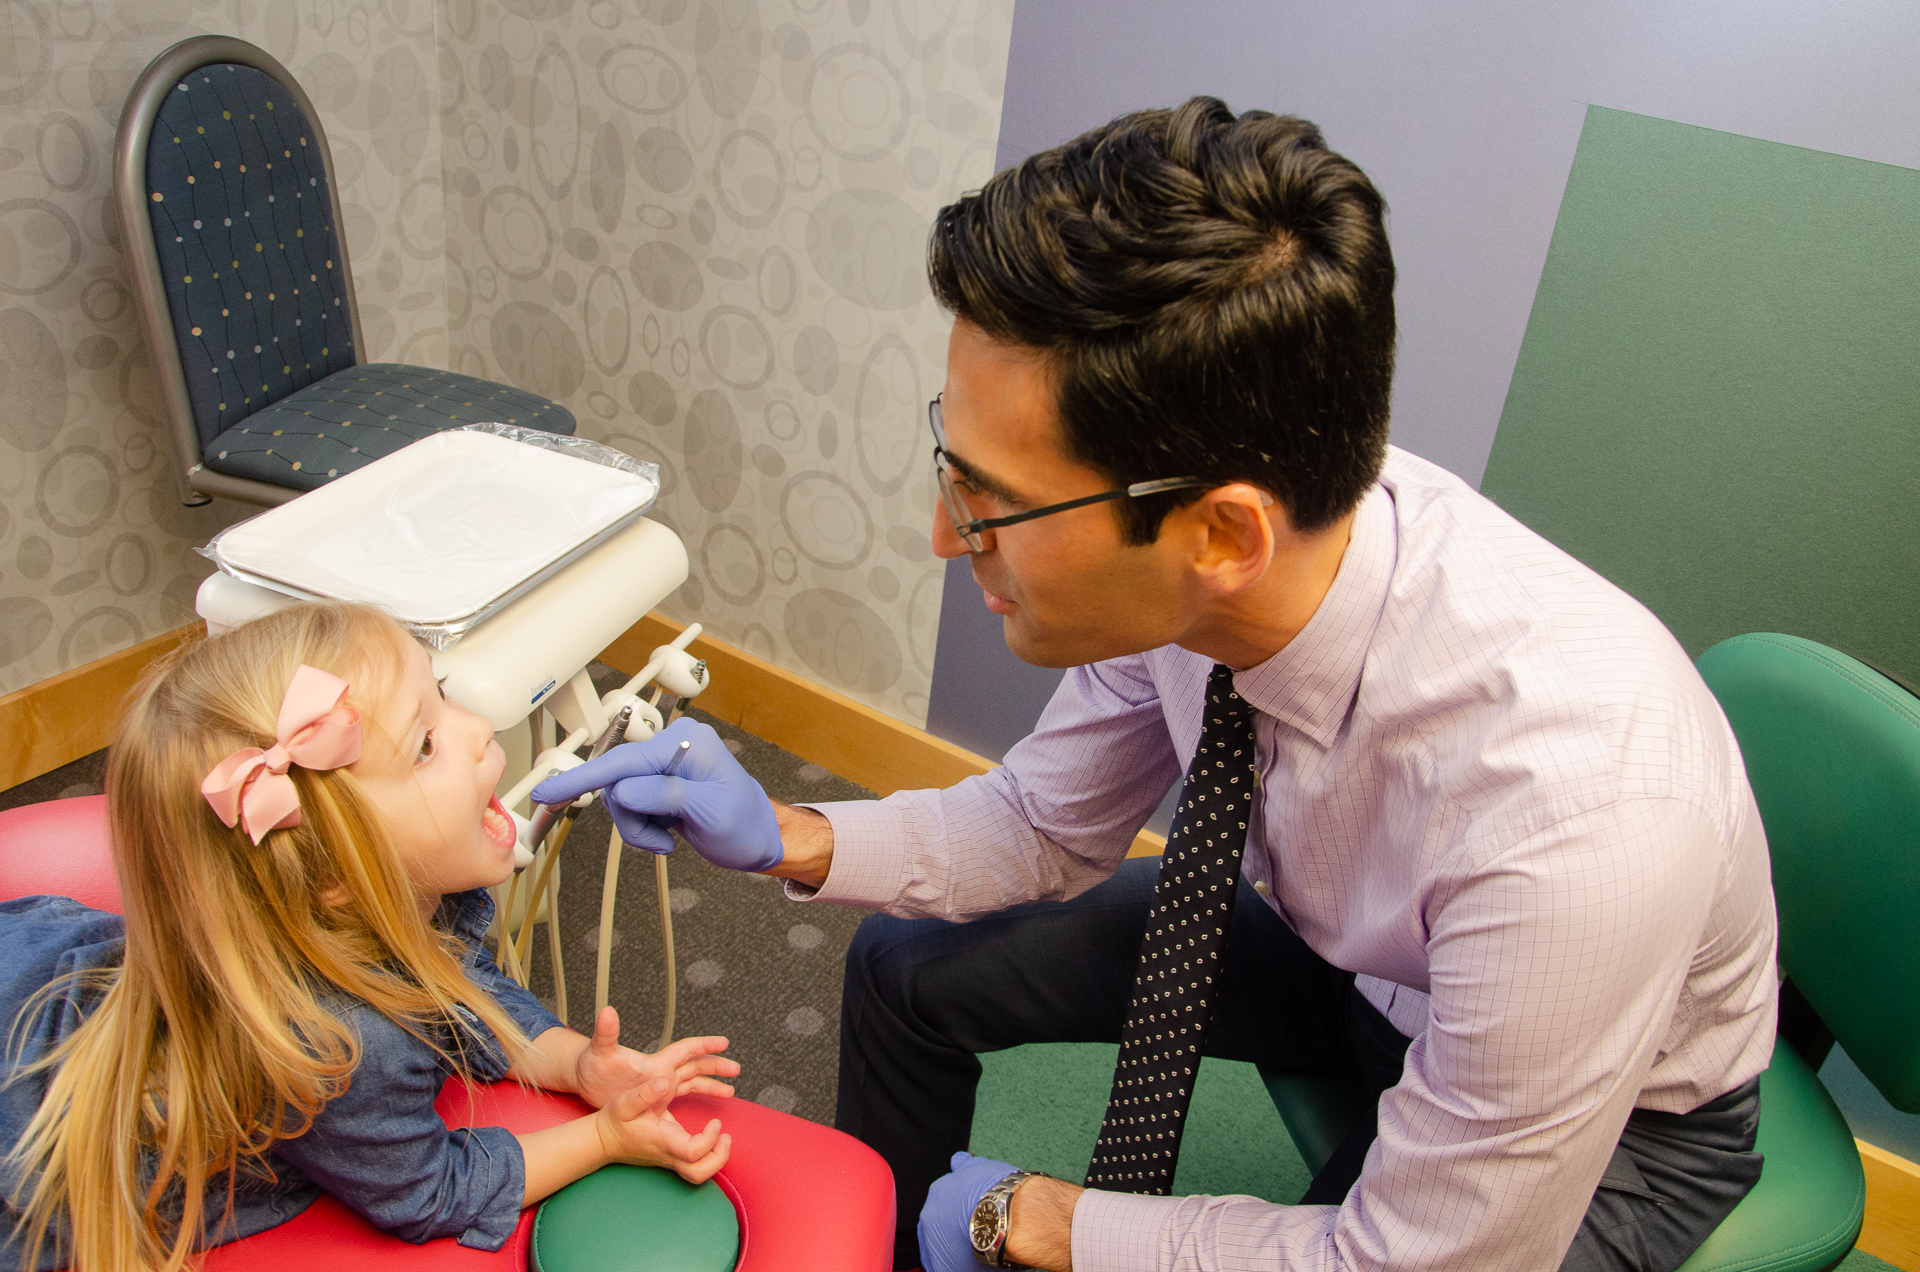 Prepping Your Child For Their Dental Visits